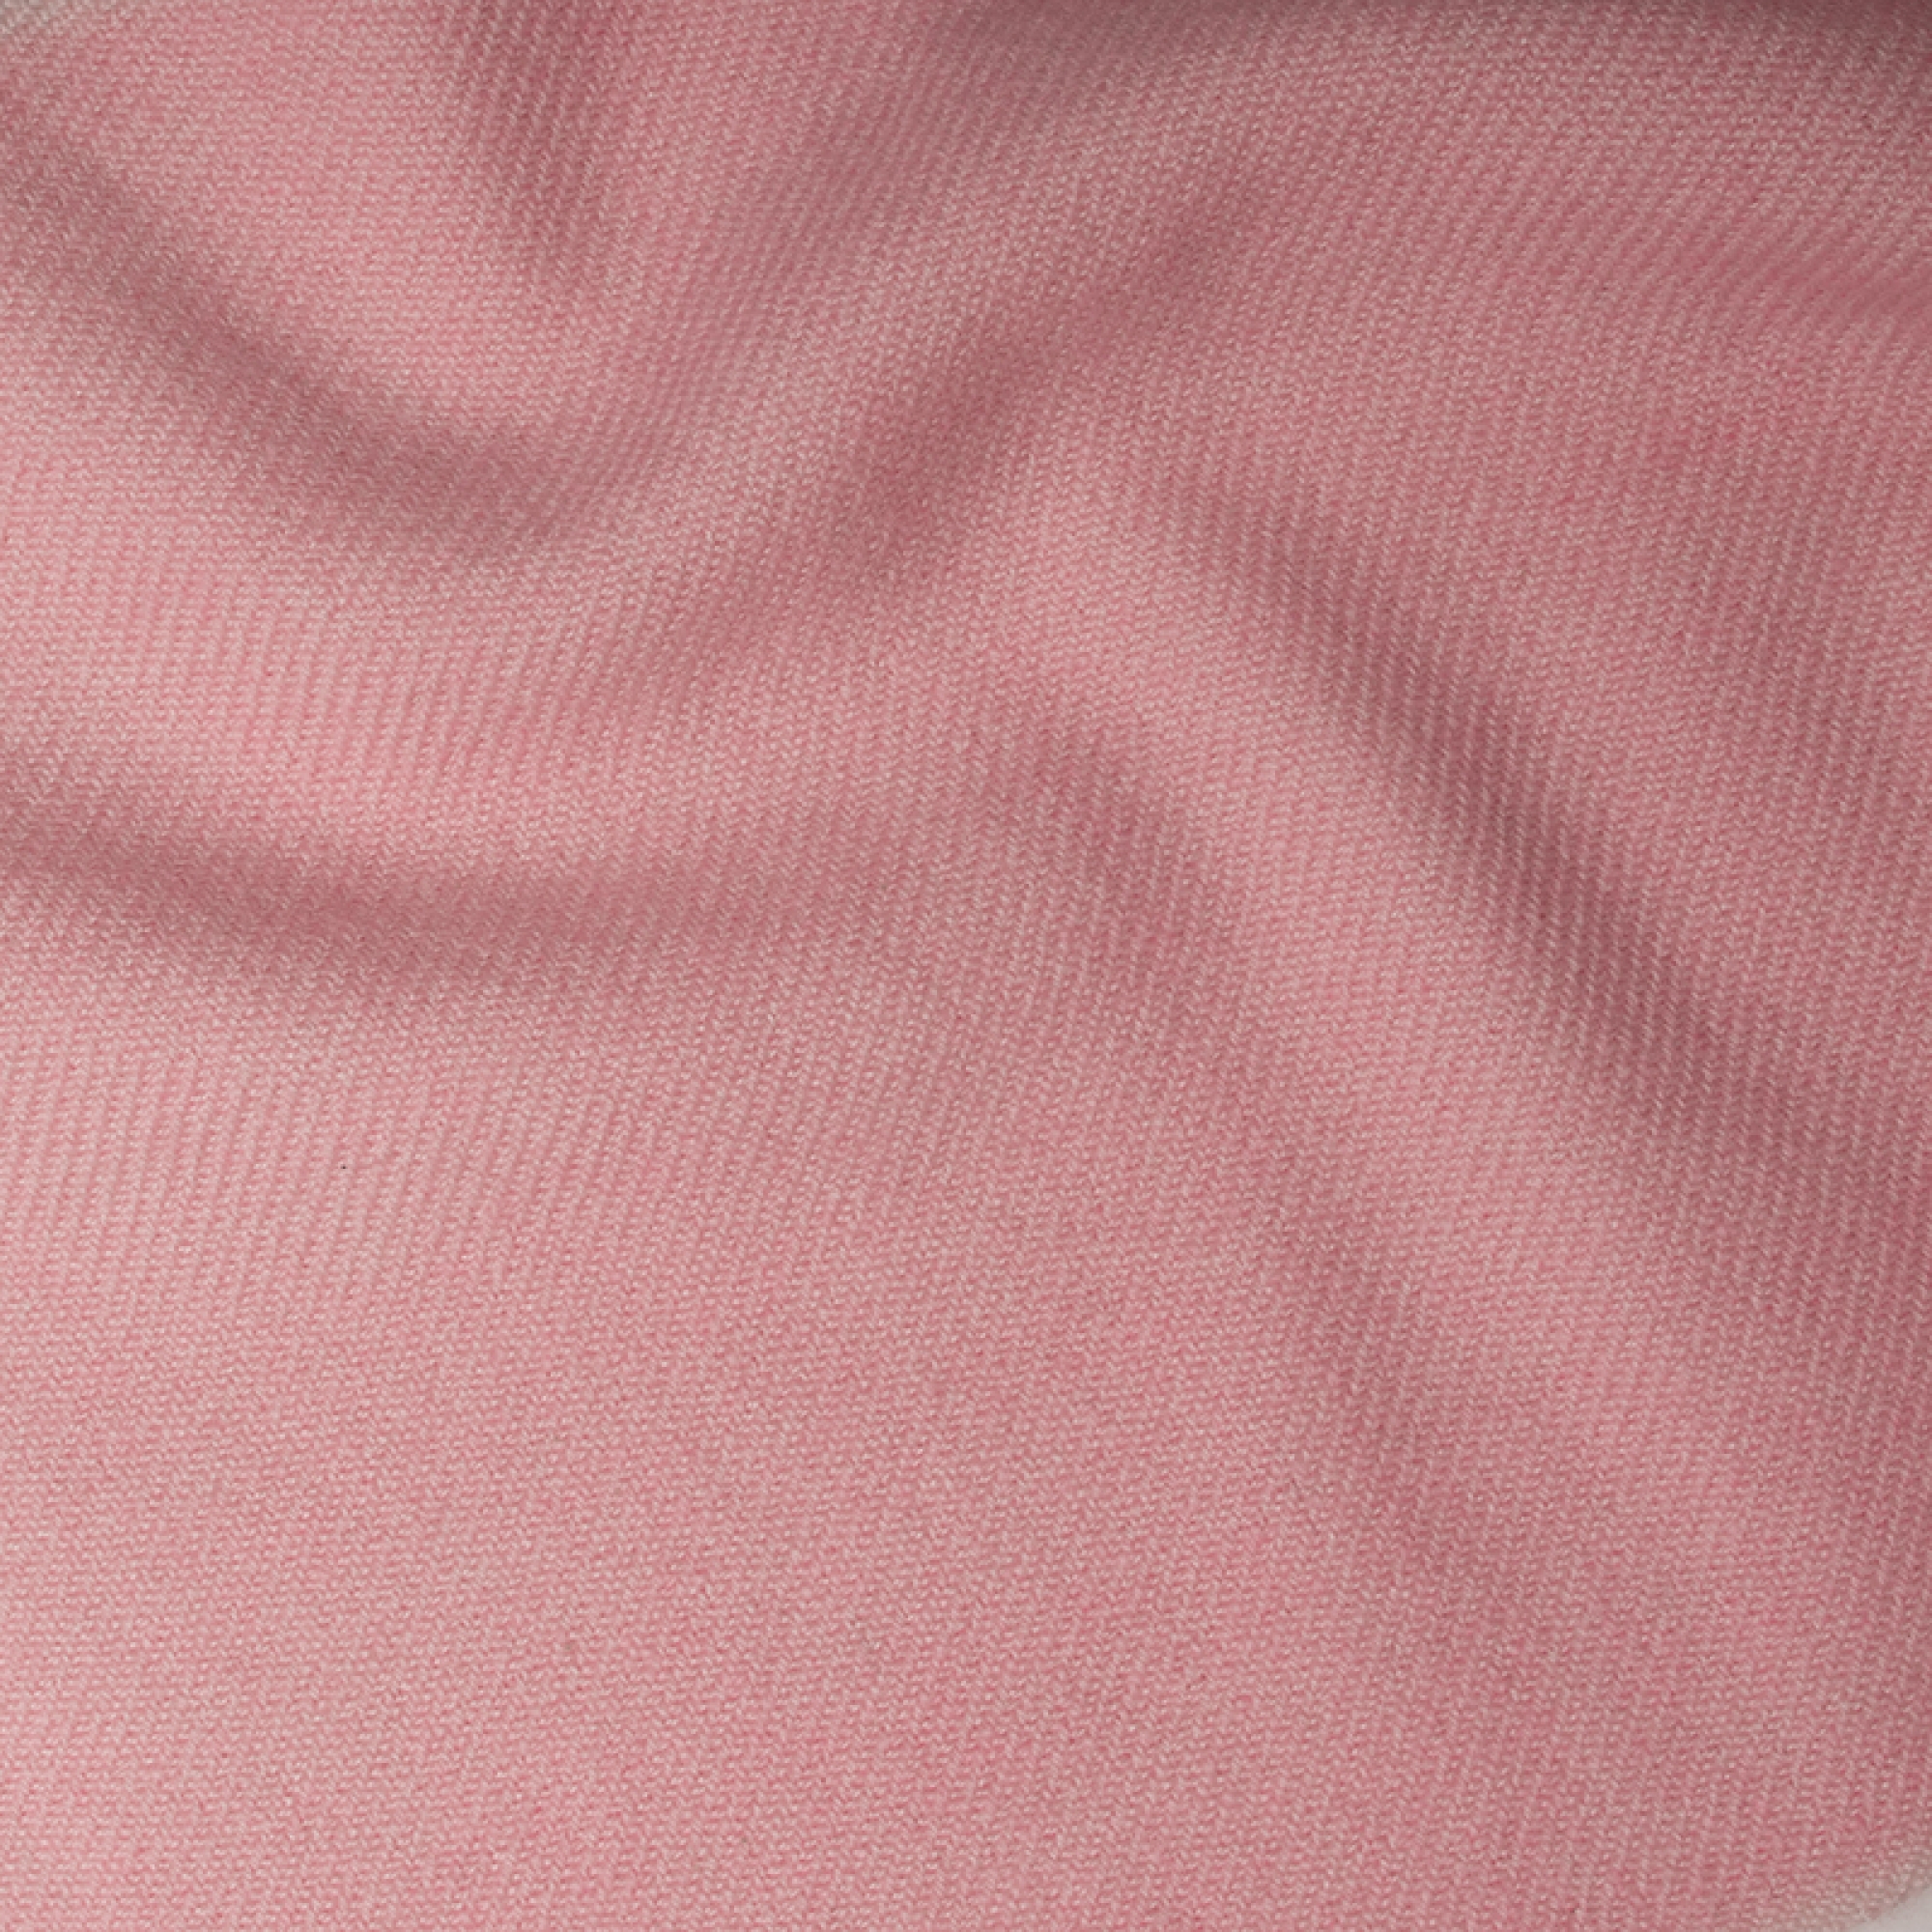 Cashmere accessories cocooning toodoo plain xl 240 x 260 blushing bride 240 x 260 cm